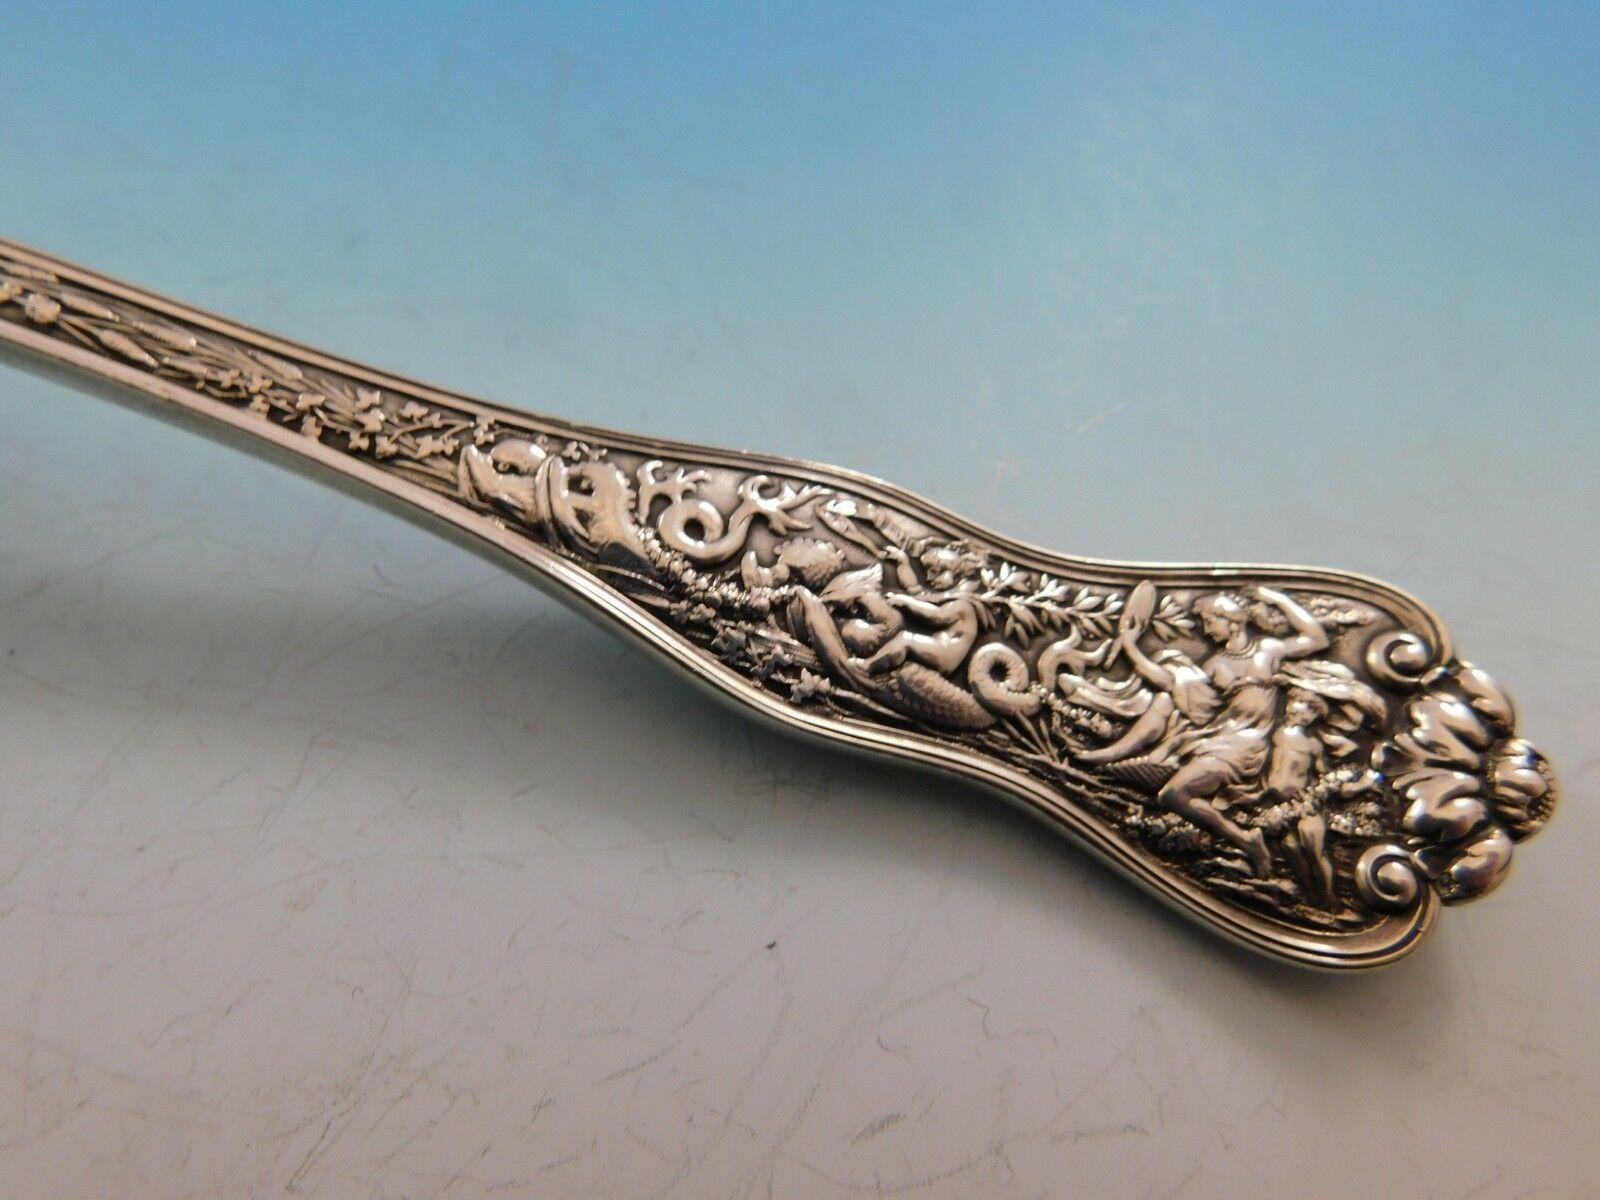 The Olympian pattern, which was introduced by Tiffany & Co. in 1878, is the most elaborate and complex of all Tiffany flatware designs. Each piece of Olympian is designed to illustrate a well-known story of Classical mythology. The subjects vary